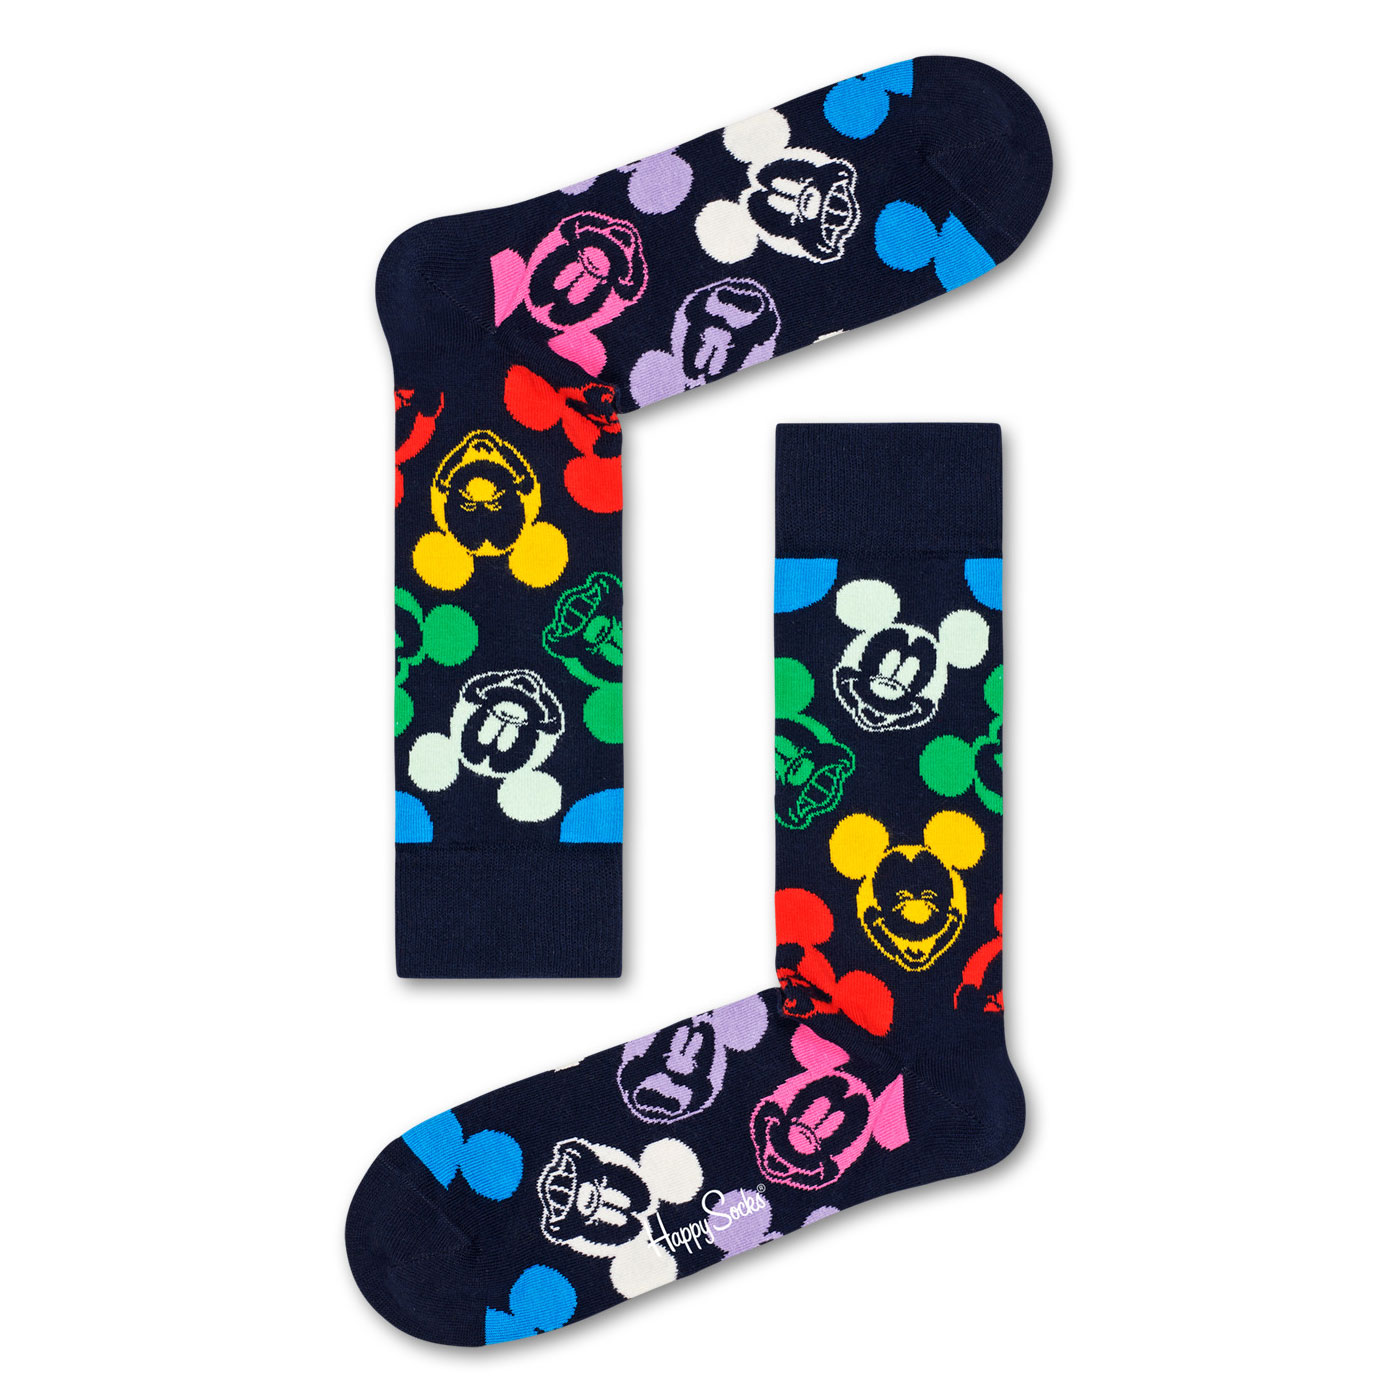 Disney Colorful Character Sock(41-46) <img src="/banner_images/banner_0000000180.gif">